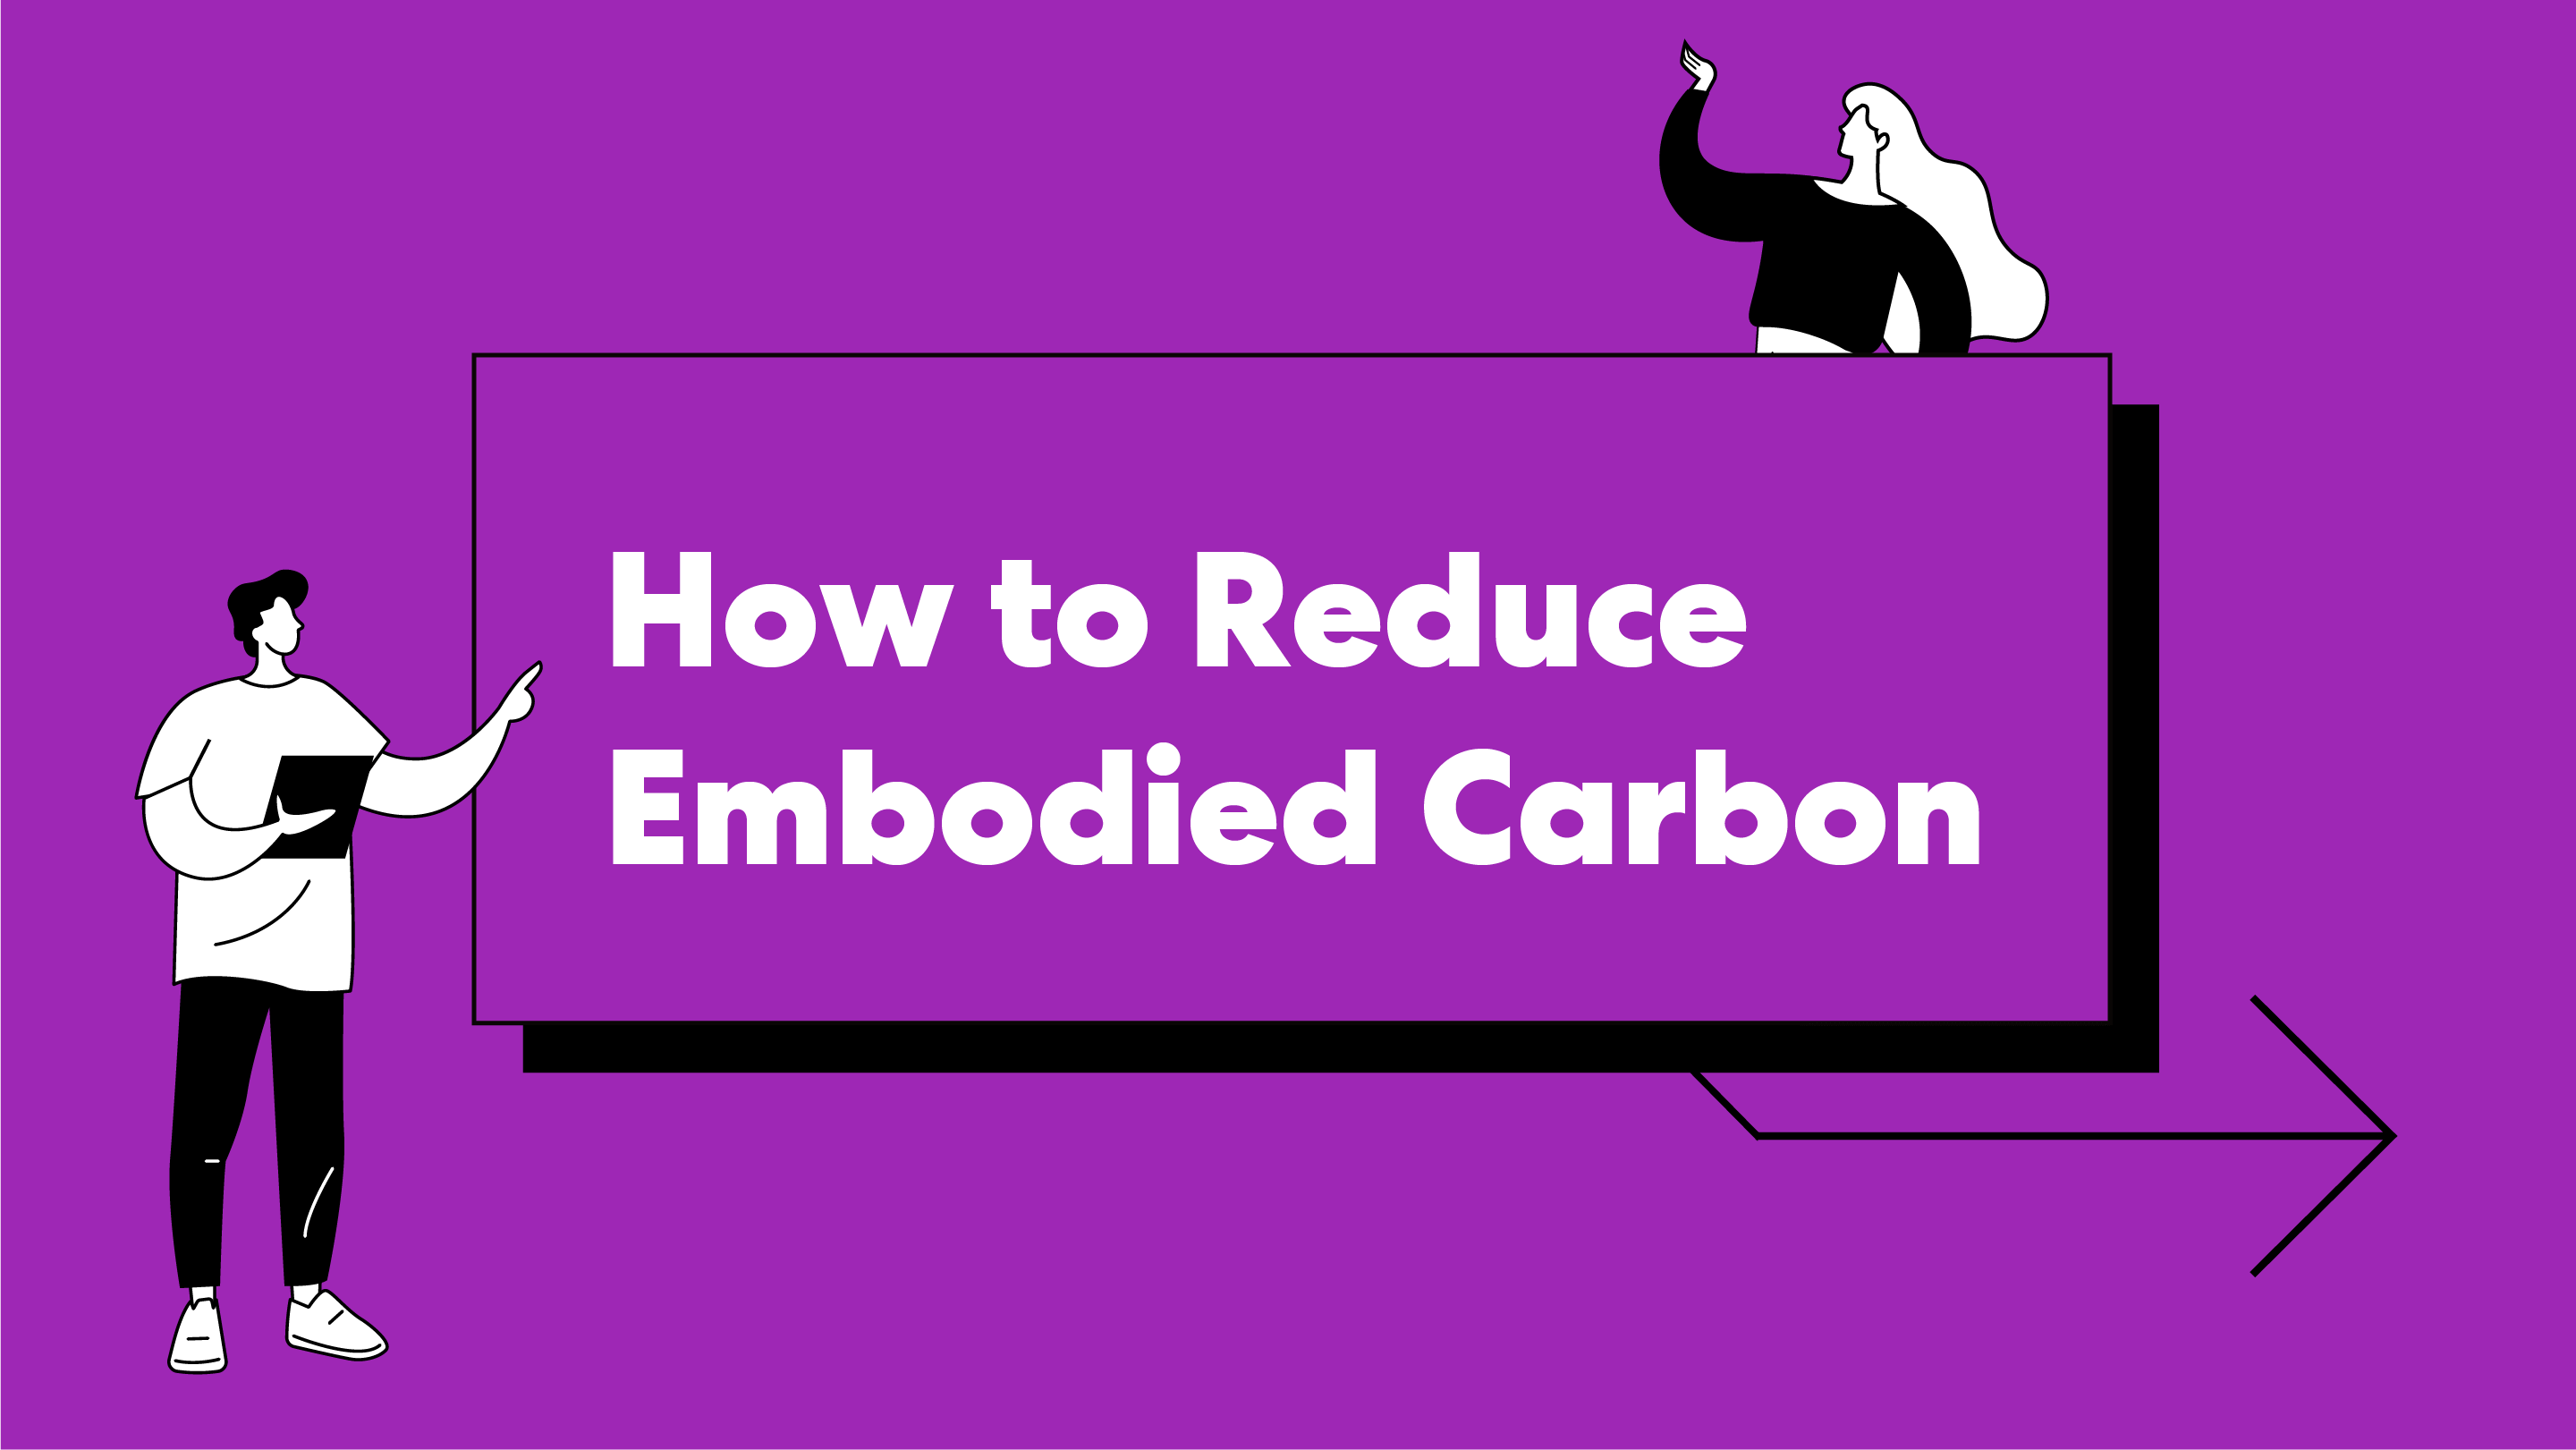 How to Reduce Embodied Carbon